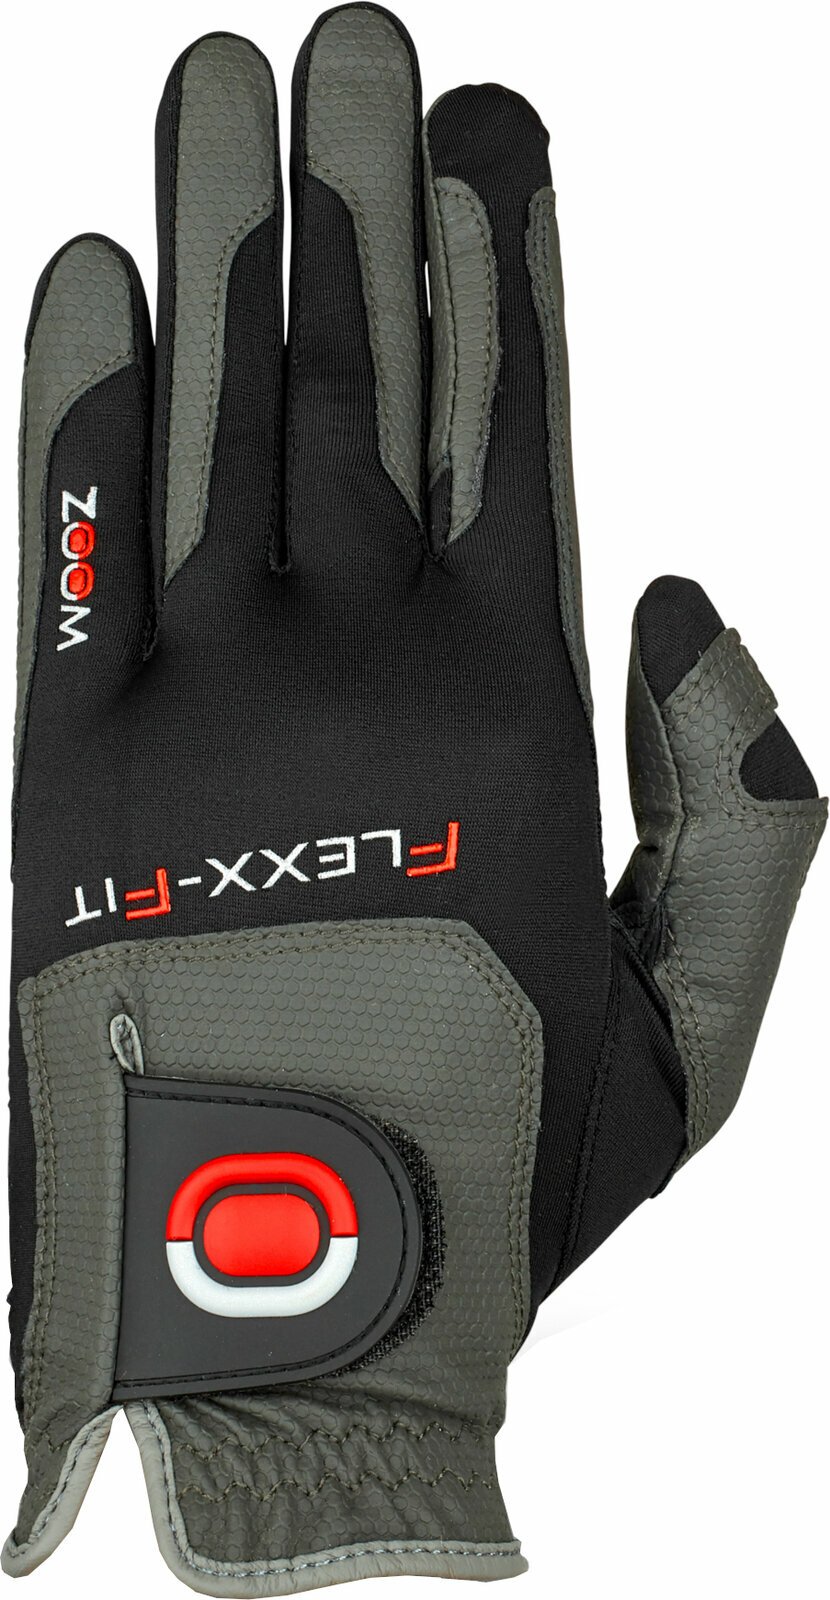 Rokavice Zoom Gloves Weather Womens Golf Glove Charcoal/Black/Red LH